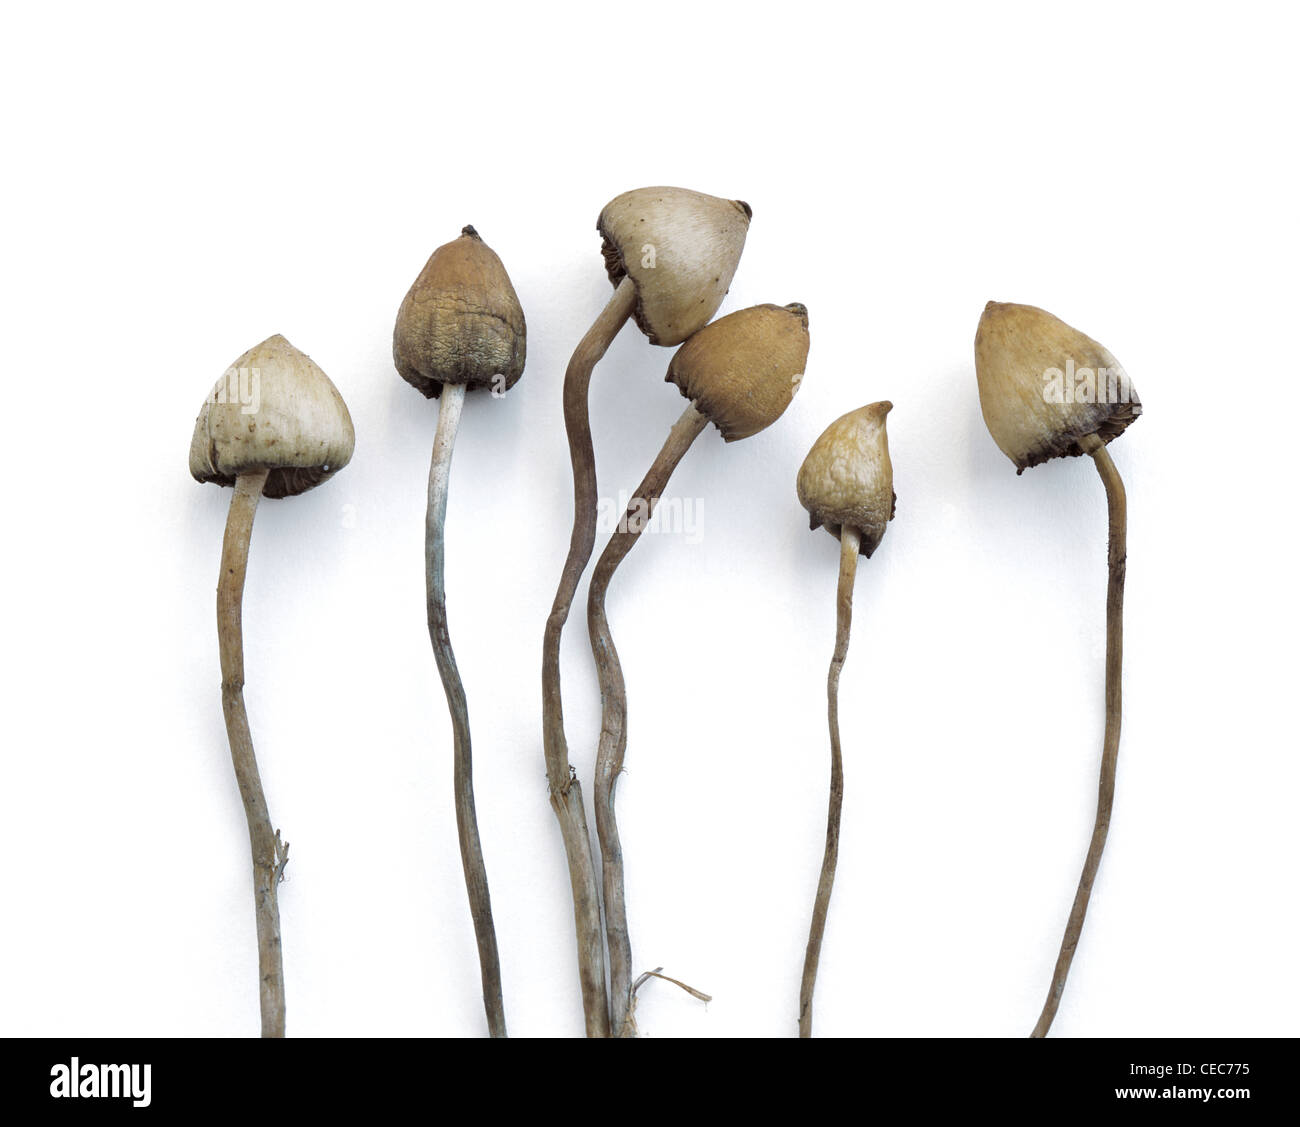 Specimens of magic mushrooms - Liberty Caps - photographed one day after  picking near Pulborough, West Sussex Stock Photo - Alamy